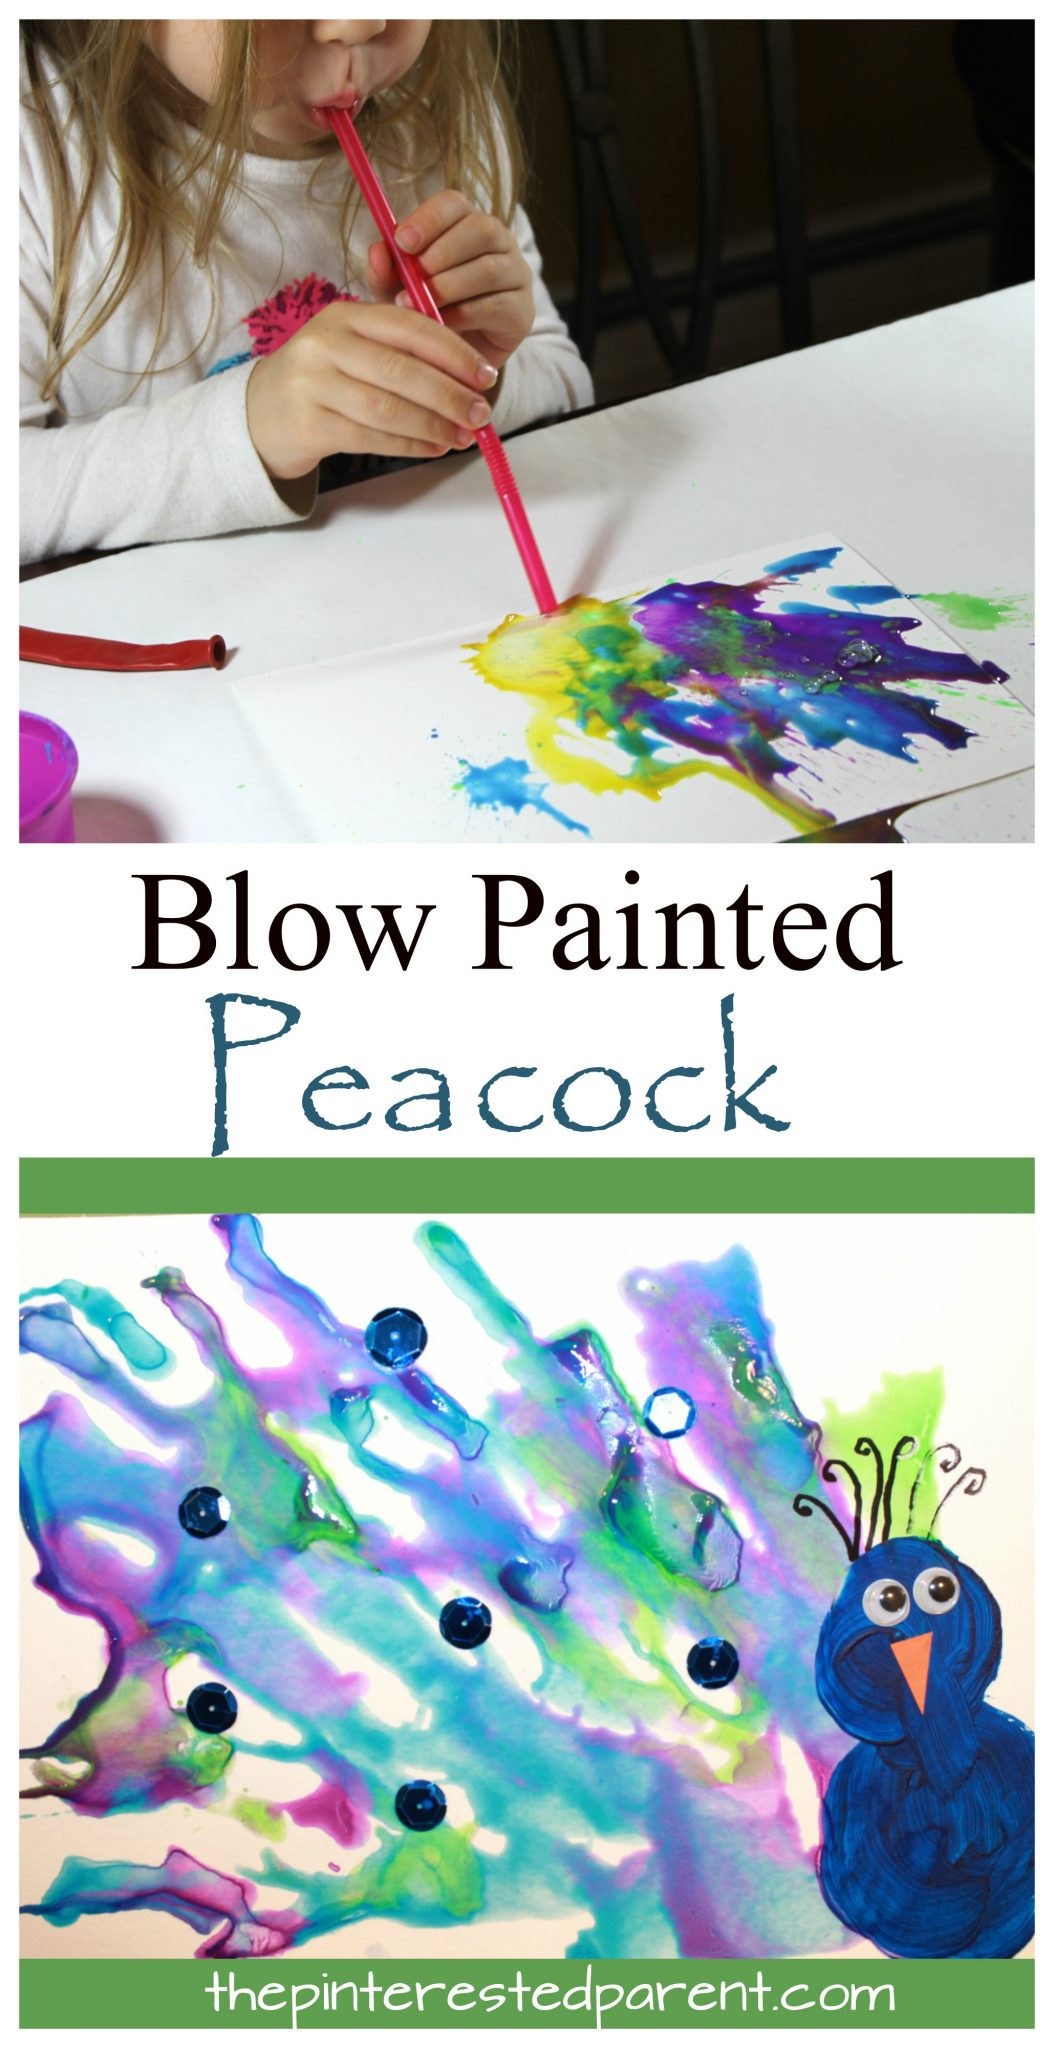 Summer Art Projects Preschool
 Straw Blown Peacock Painting – The Pinterested Parent